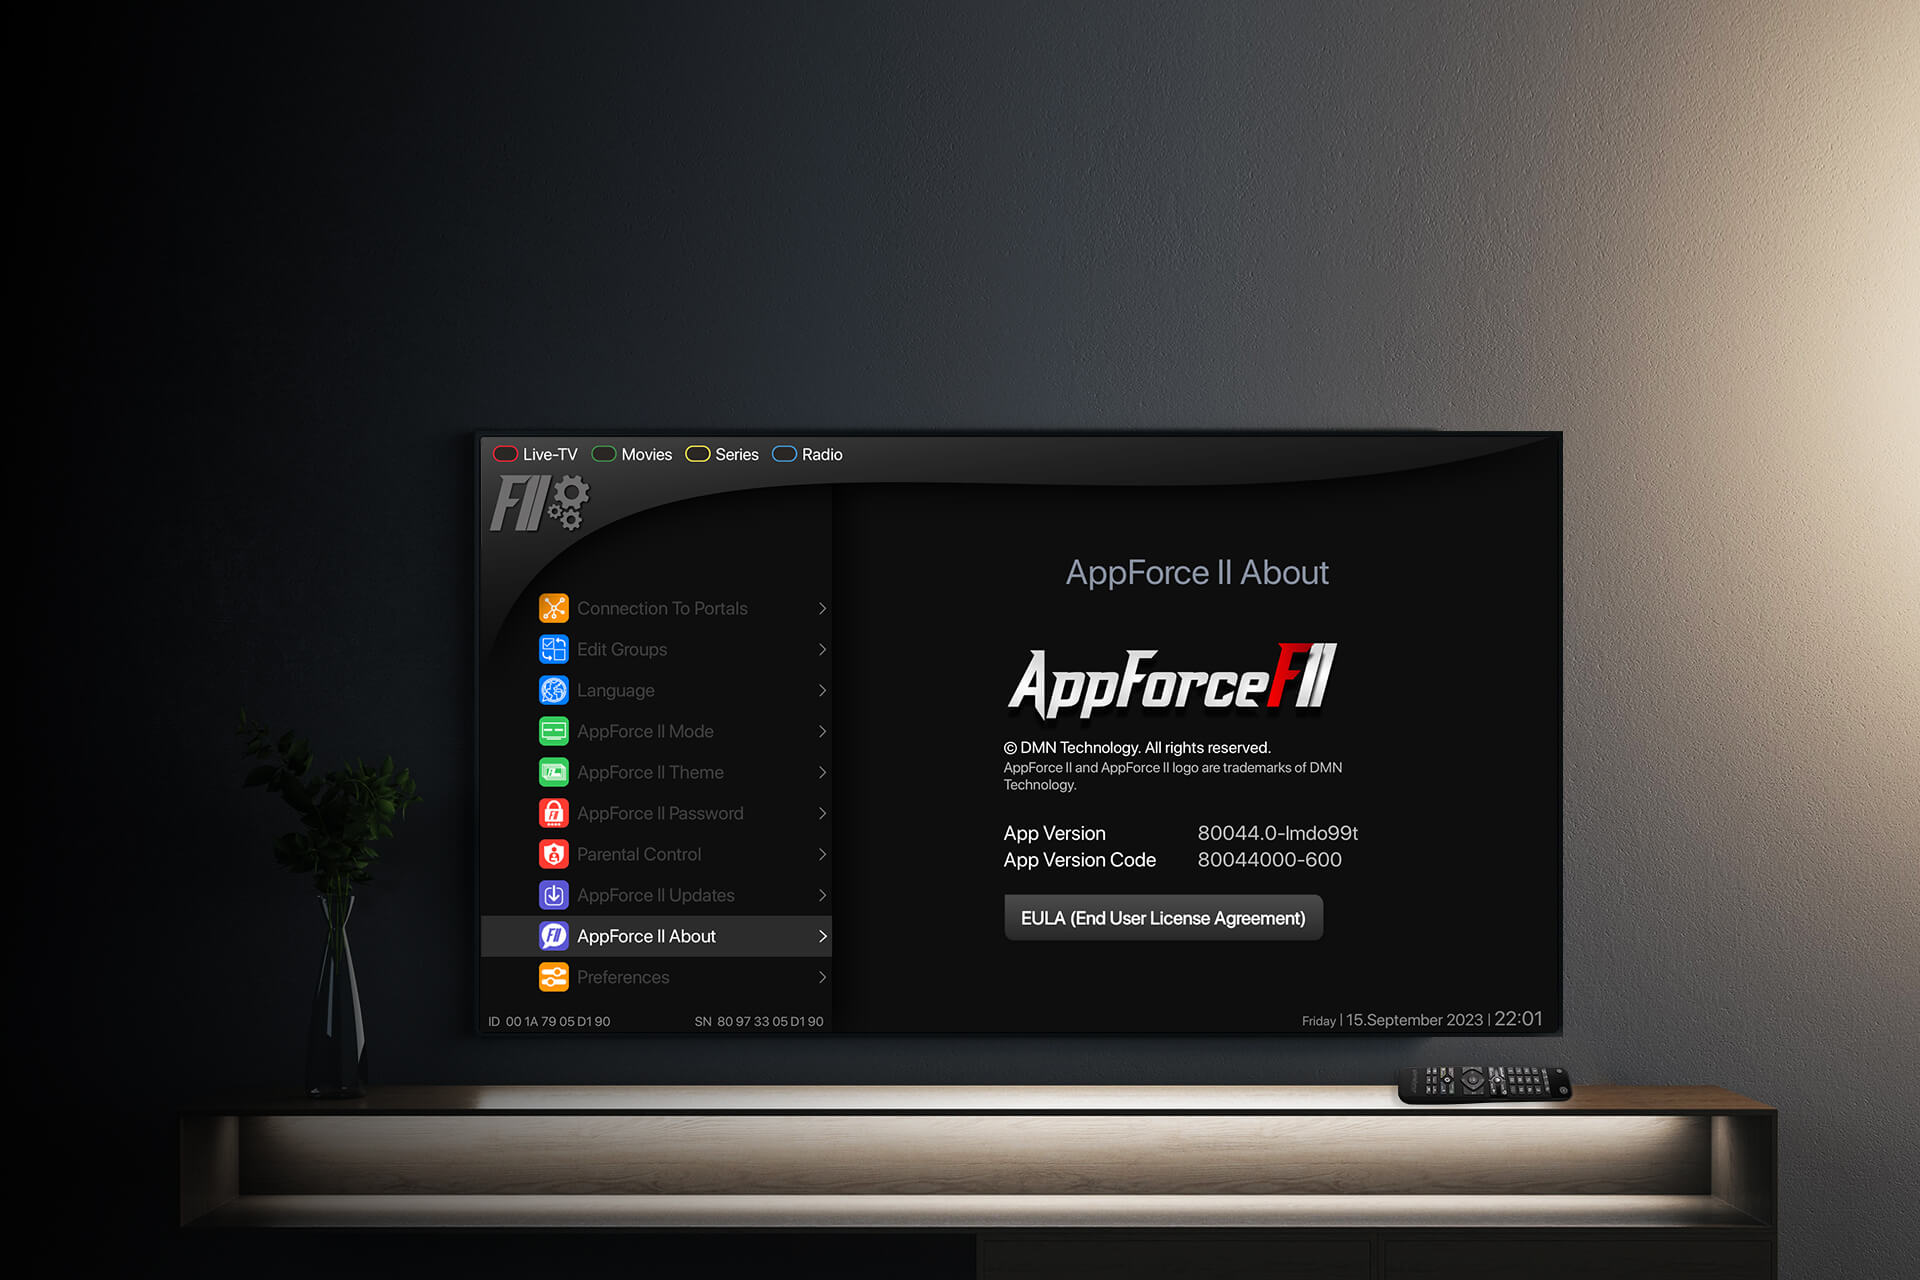 Appforce FII About